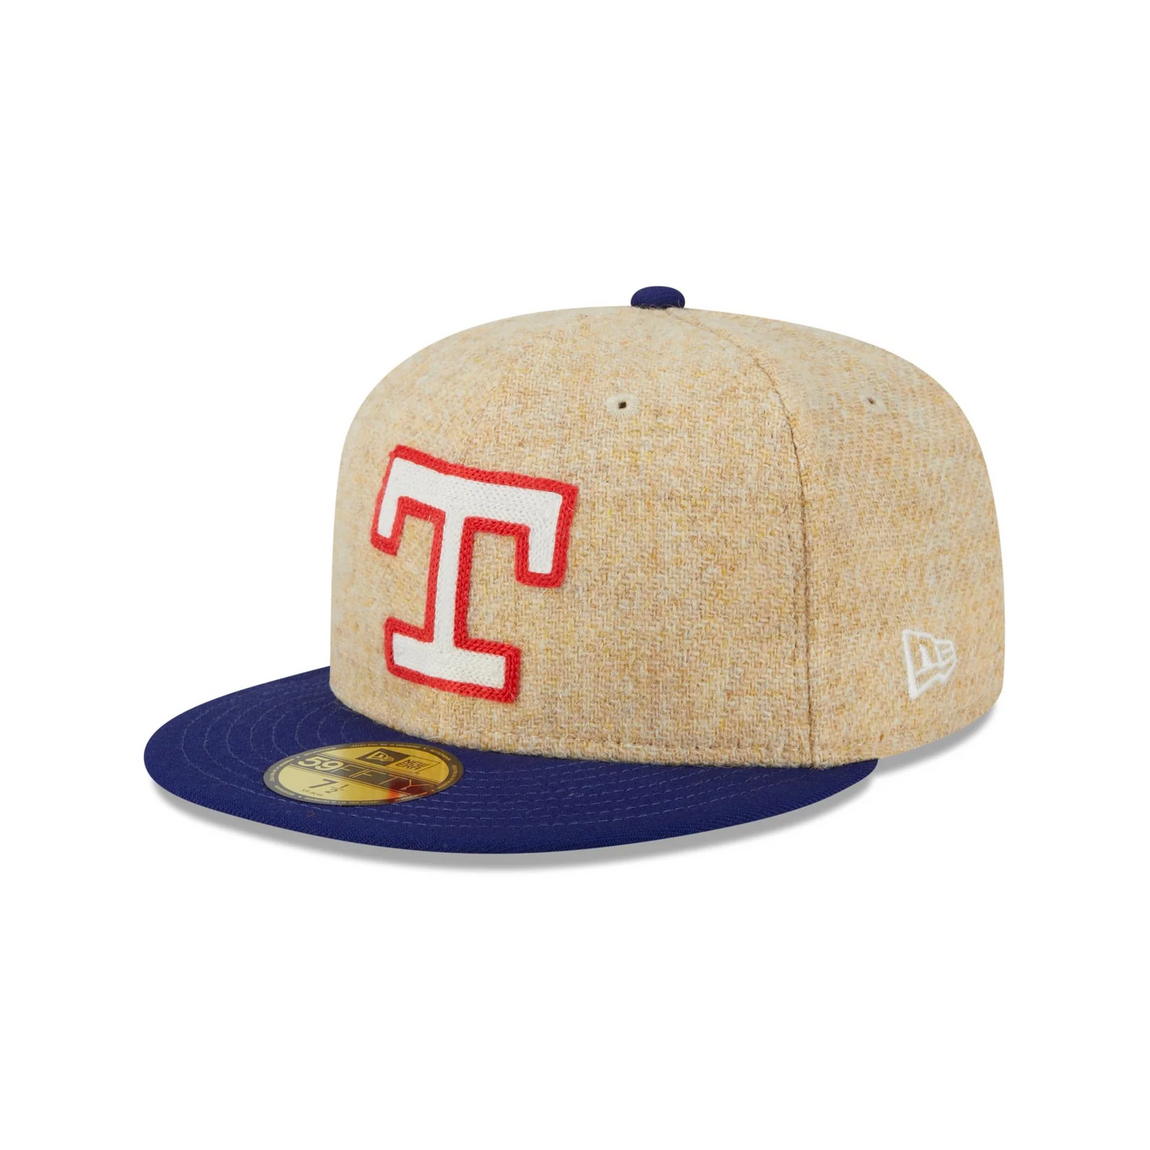 New Era 59FIFTY Texas Rangers Harris Tweed Fitted Hat (Khaki/Red